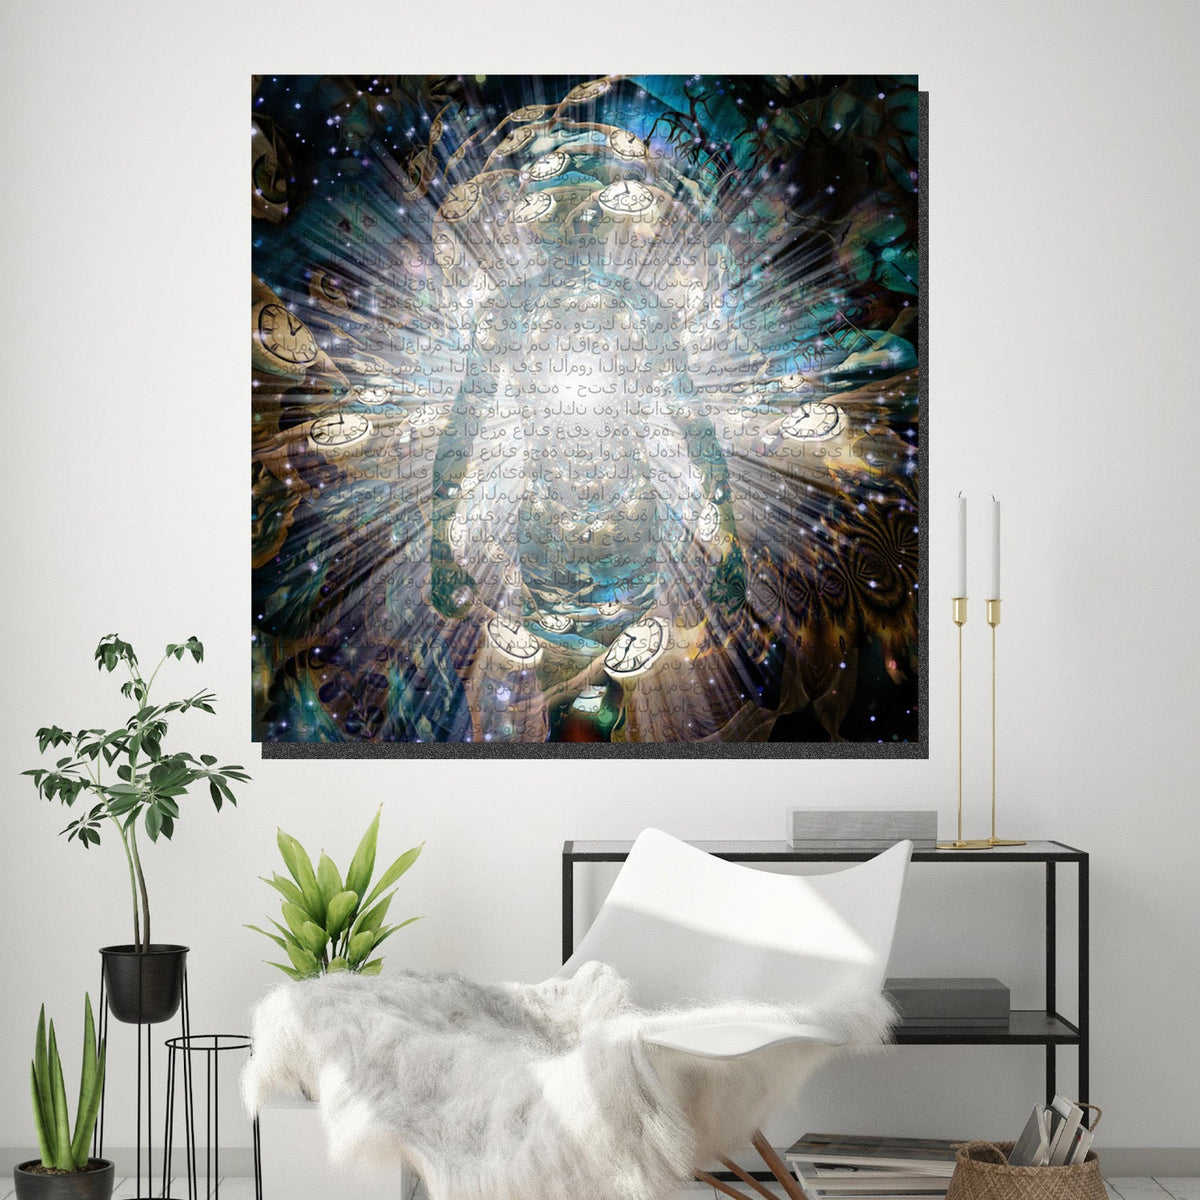 https://cdn.shopify.com/s/files/1/0387/9986/8044/products/TheSoulCanvasArtprintStretched-2.jpg